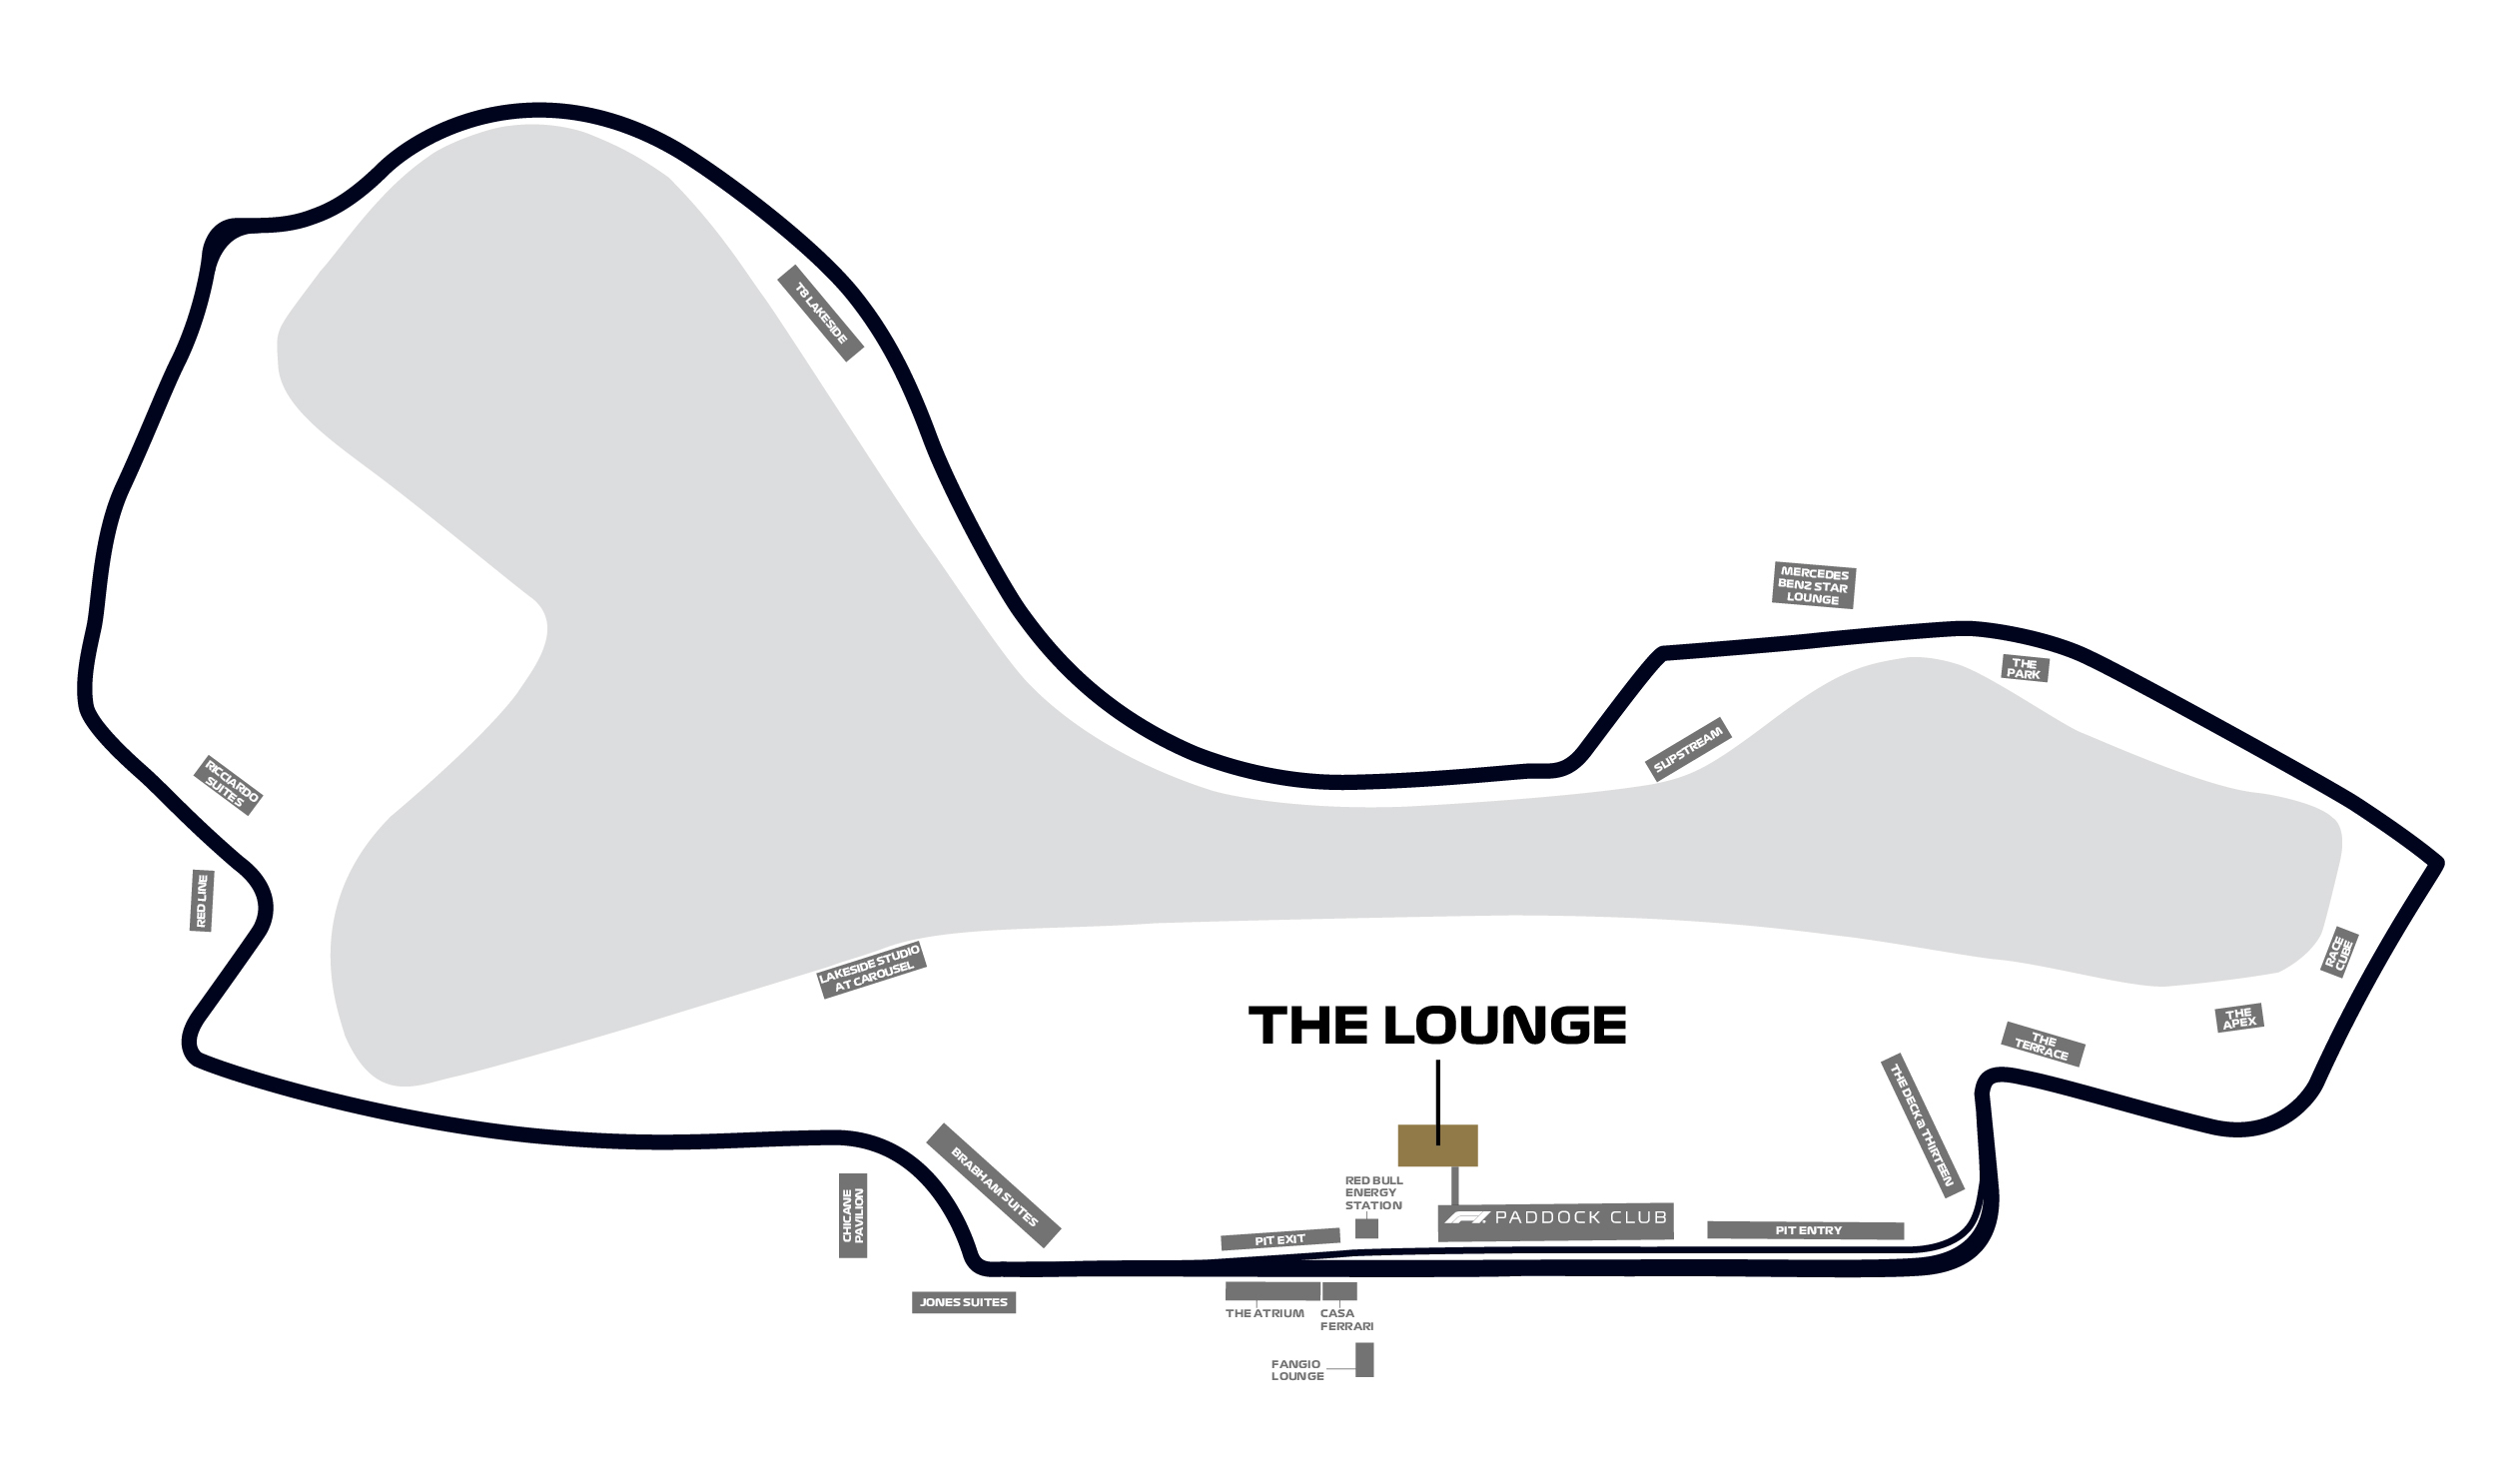 Map of The Lounge